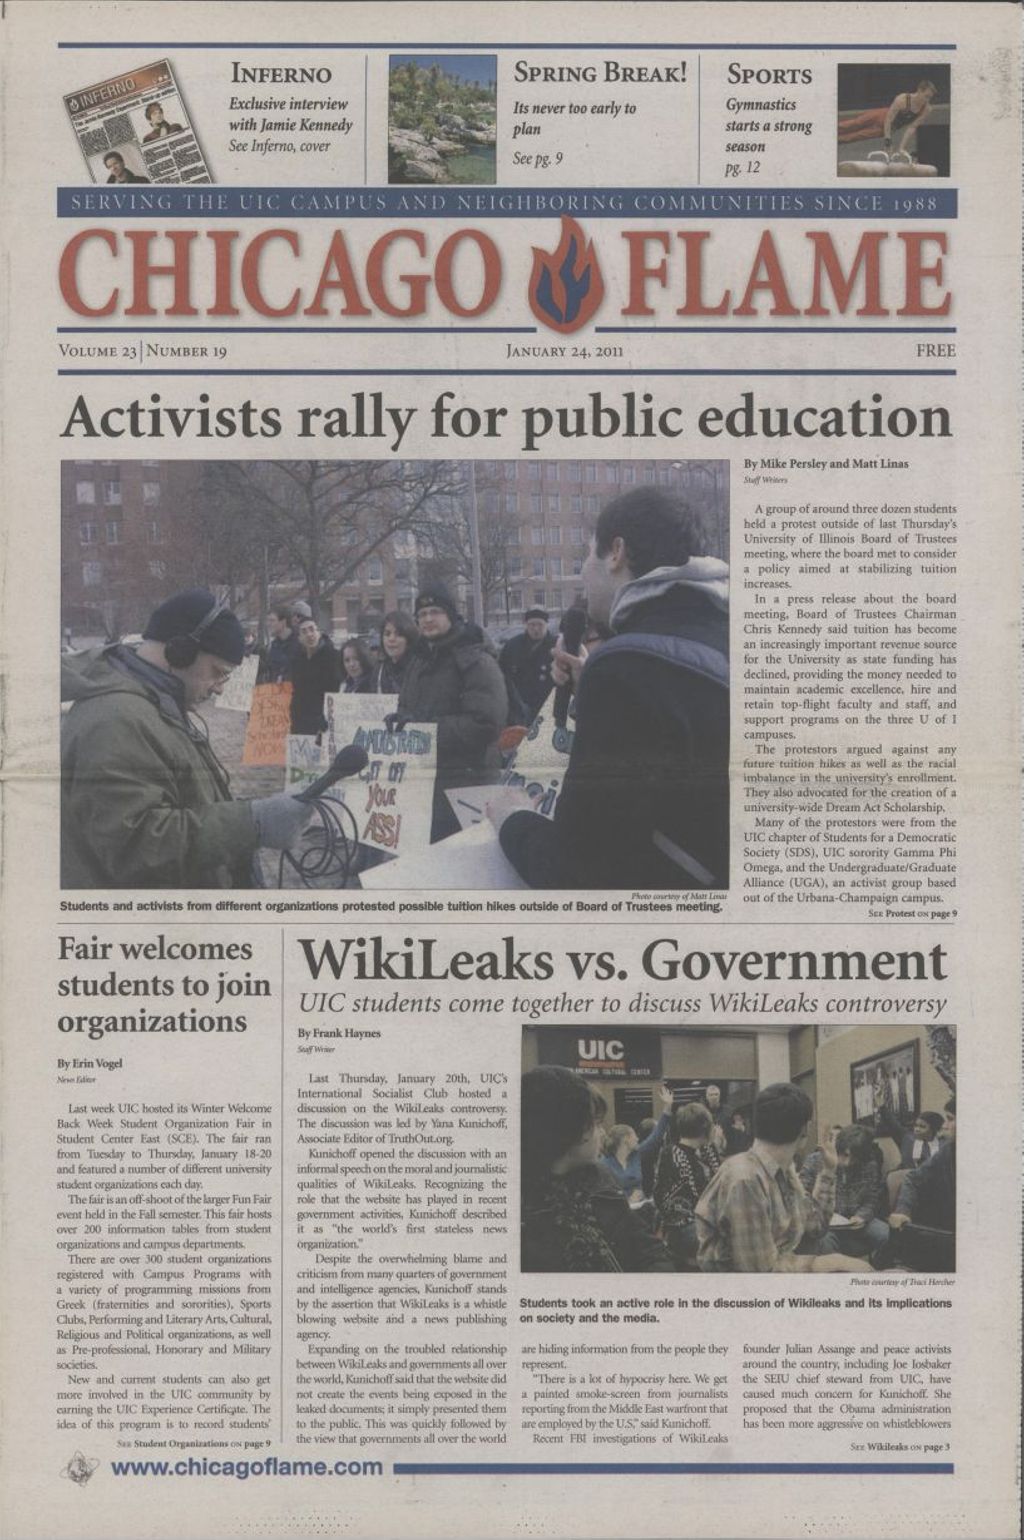 Miniature of Chicago Flame (January 24, 2011)